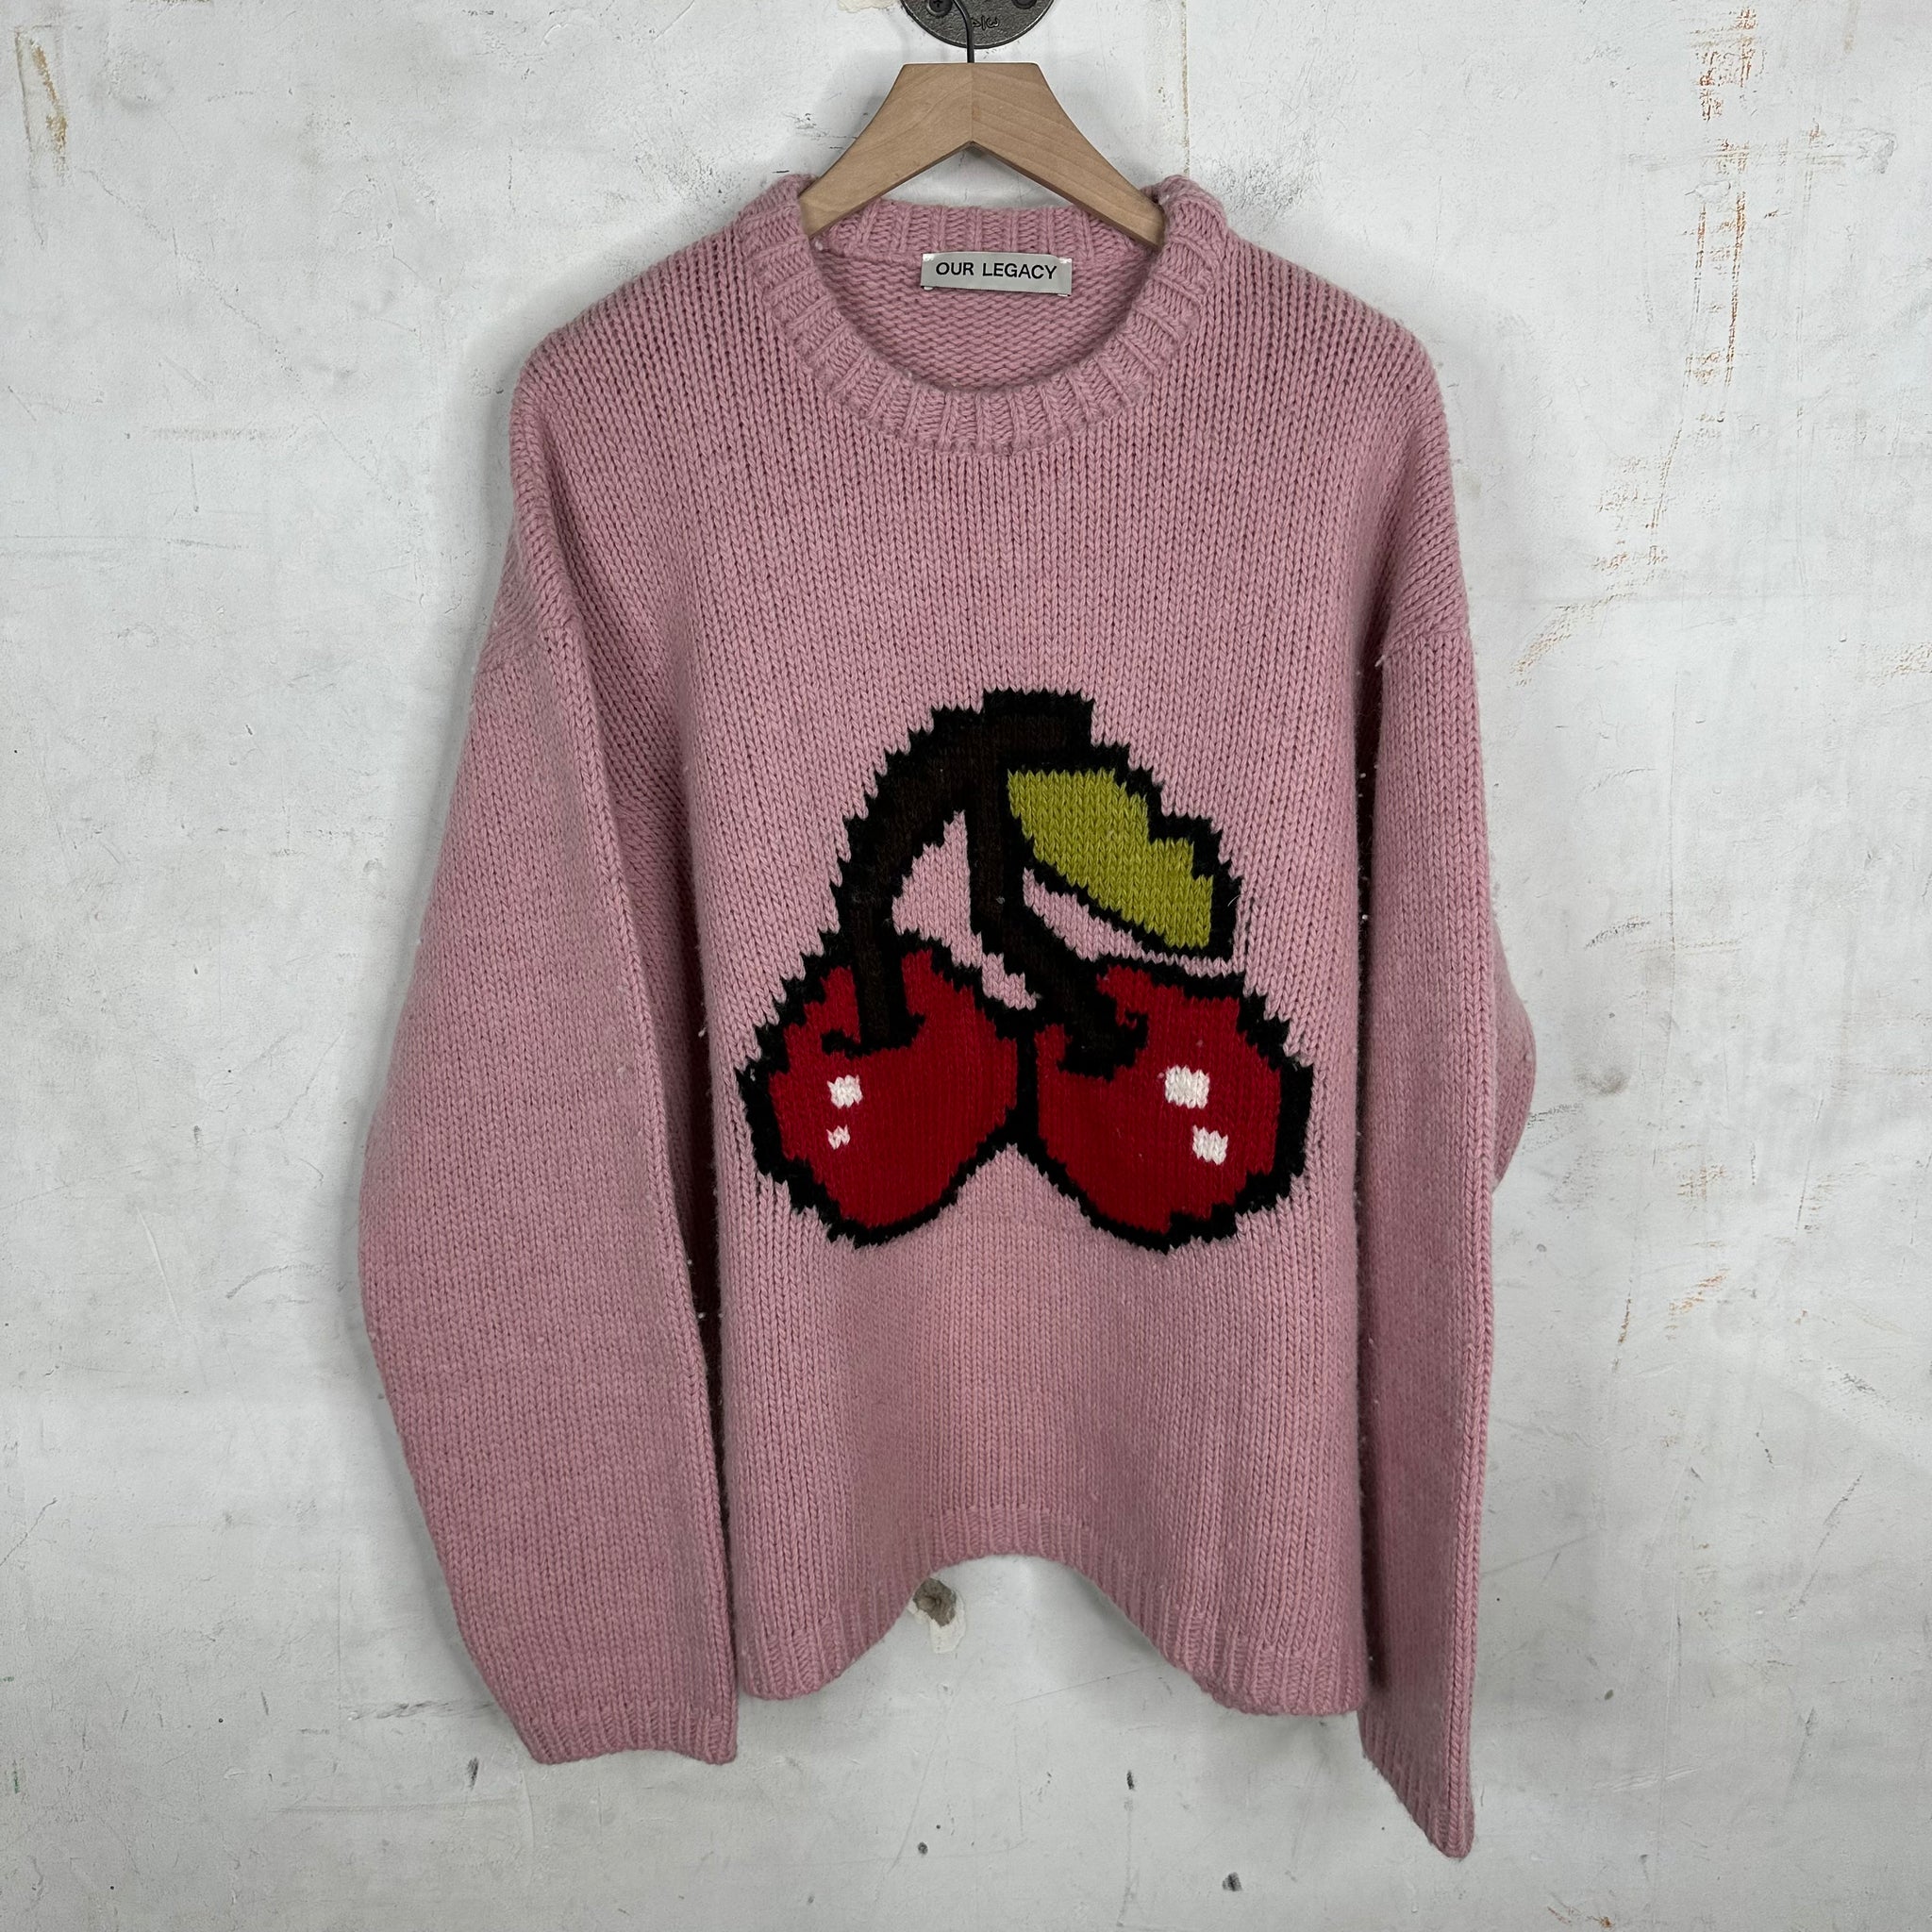 Our Legacy Cherry Knit Sweater